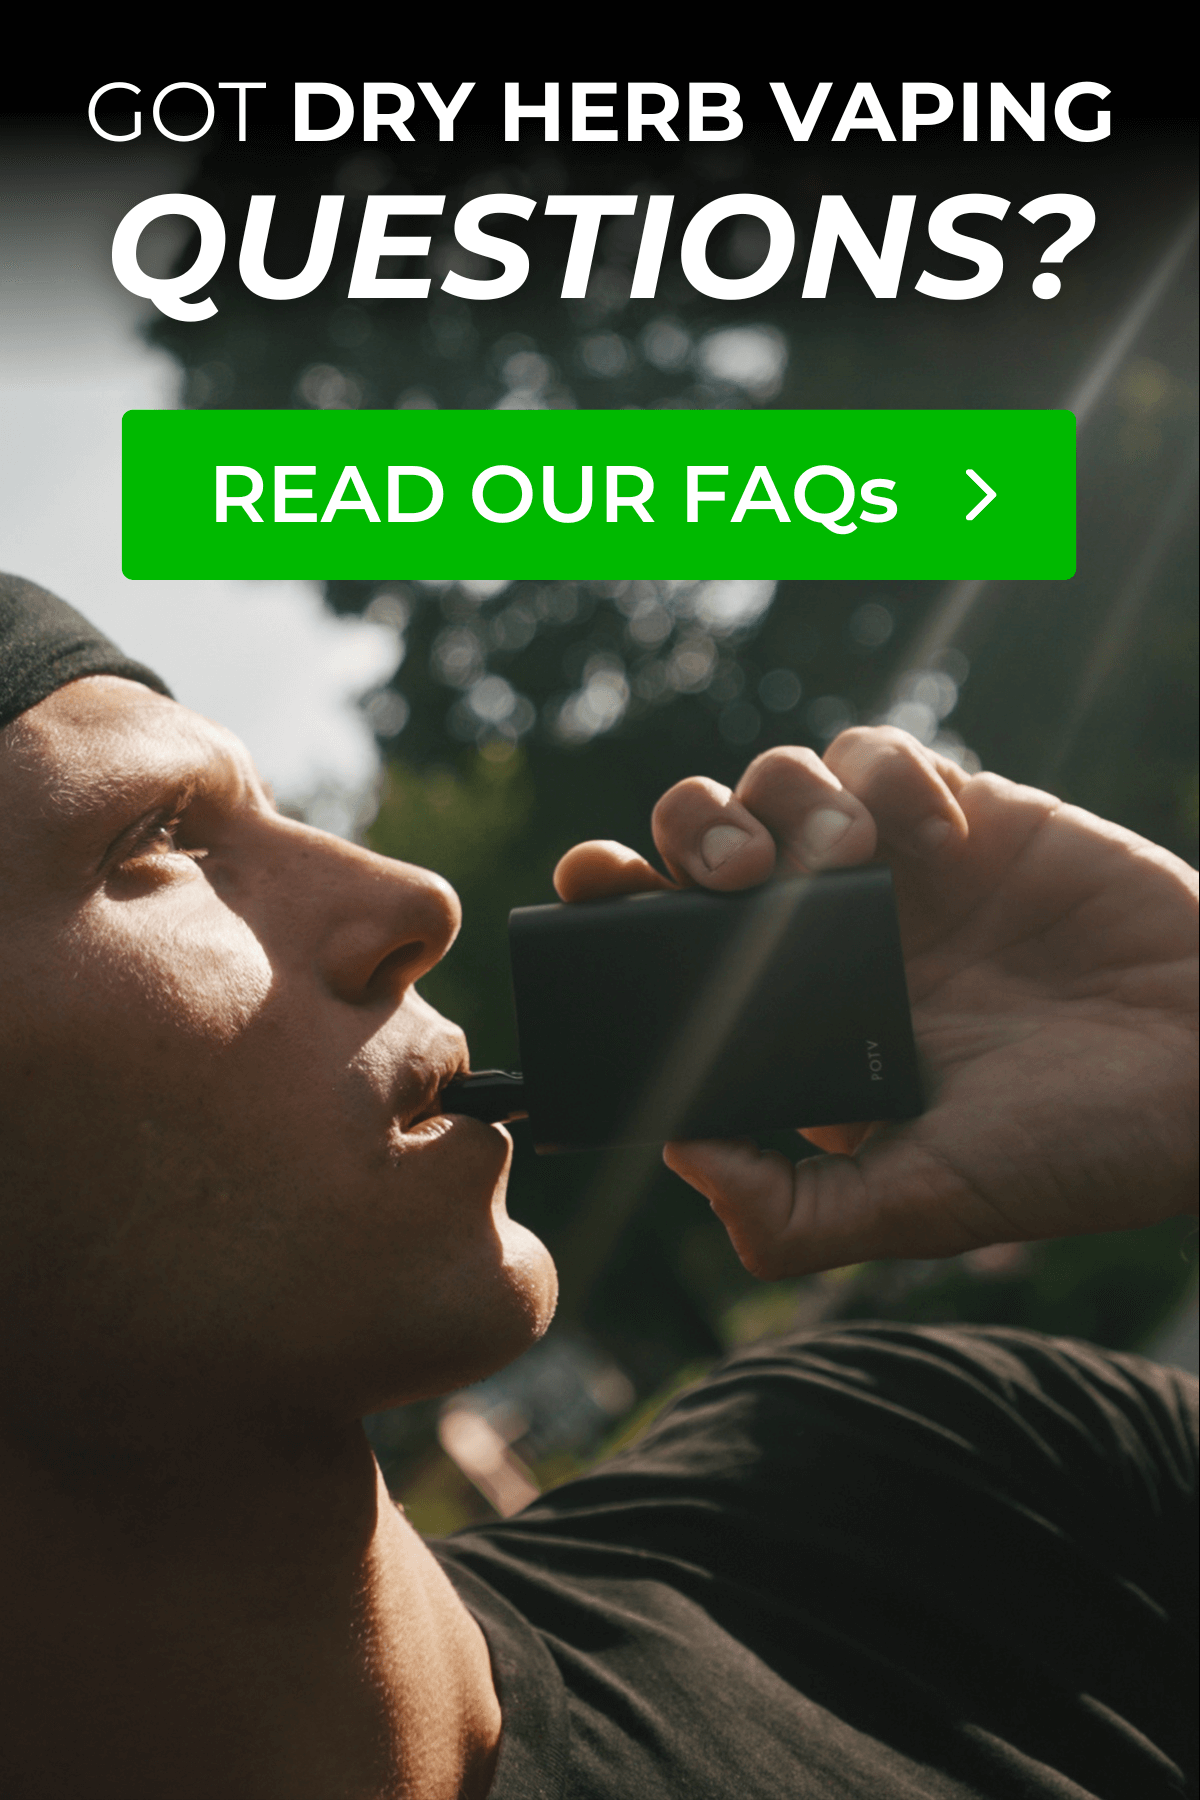 Got Dry Herb Vaping Questions? Read Our FAQs